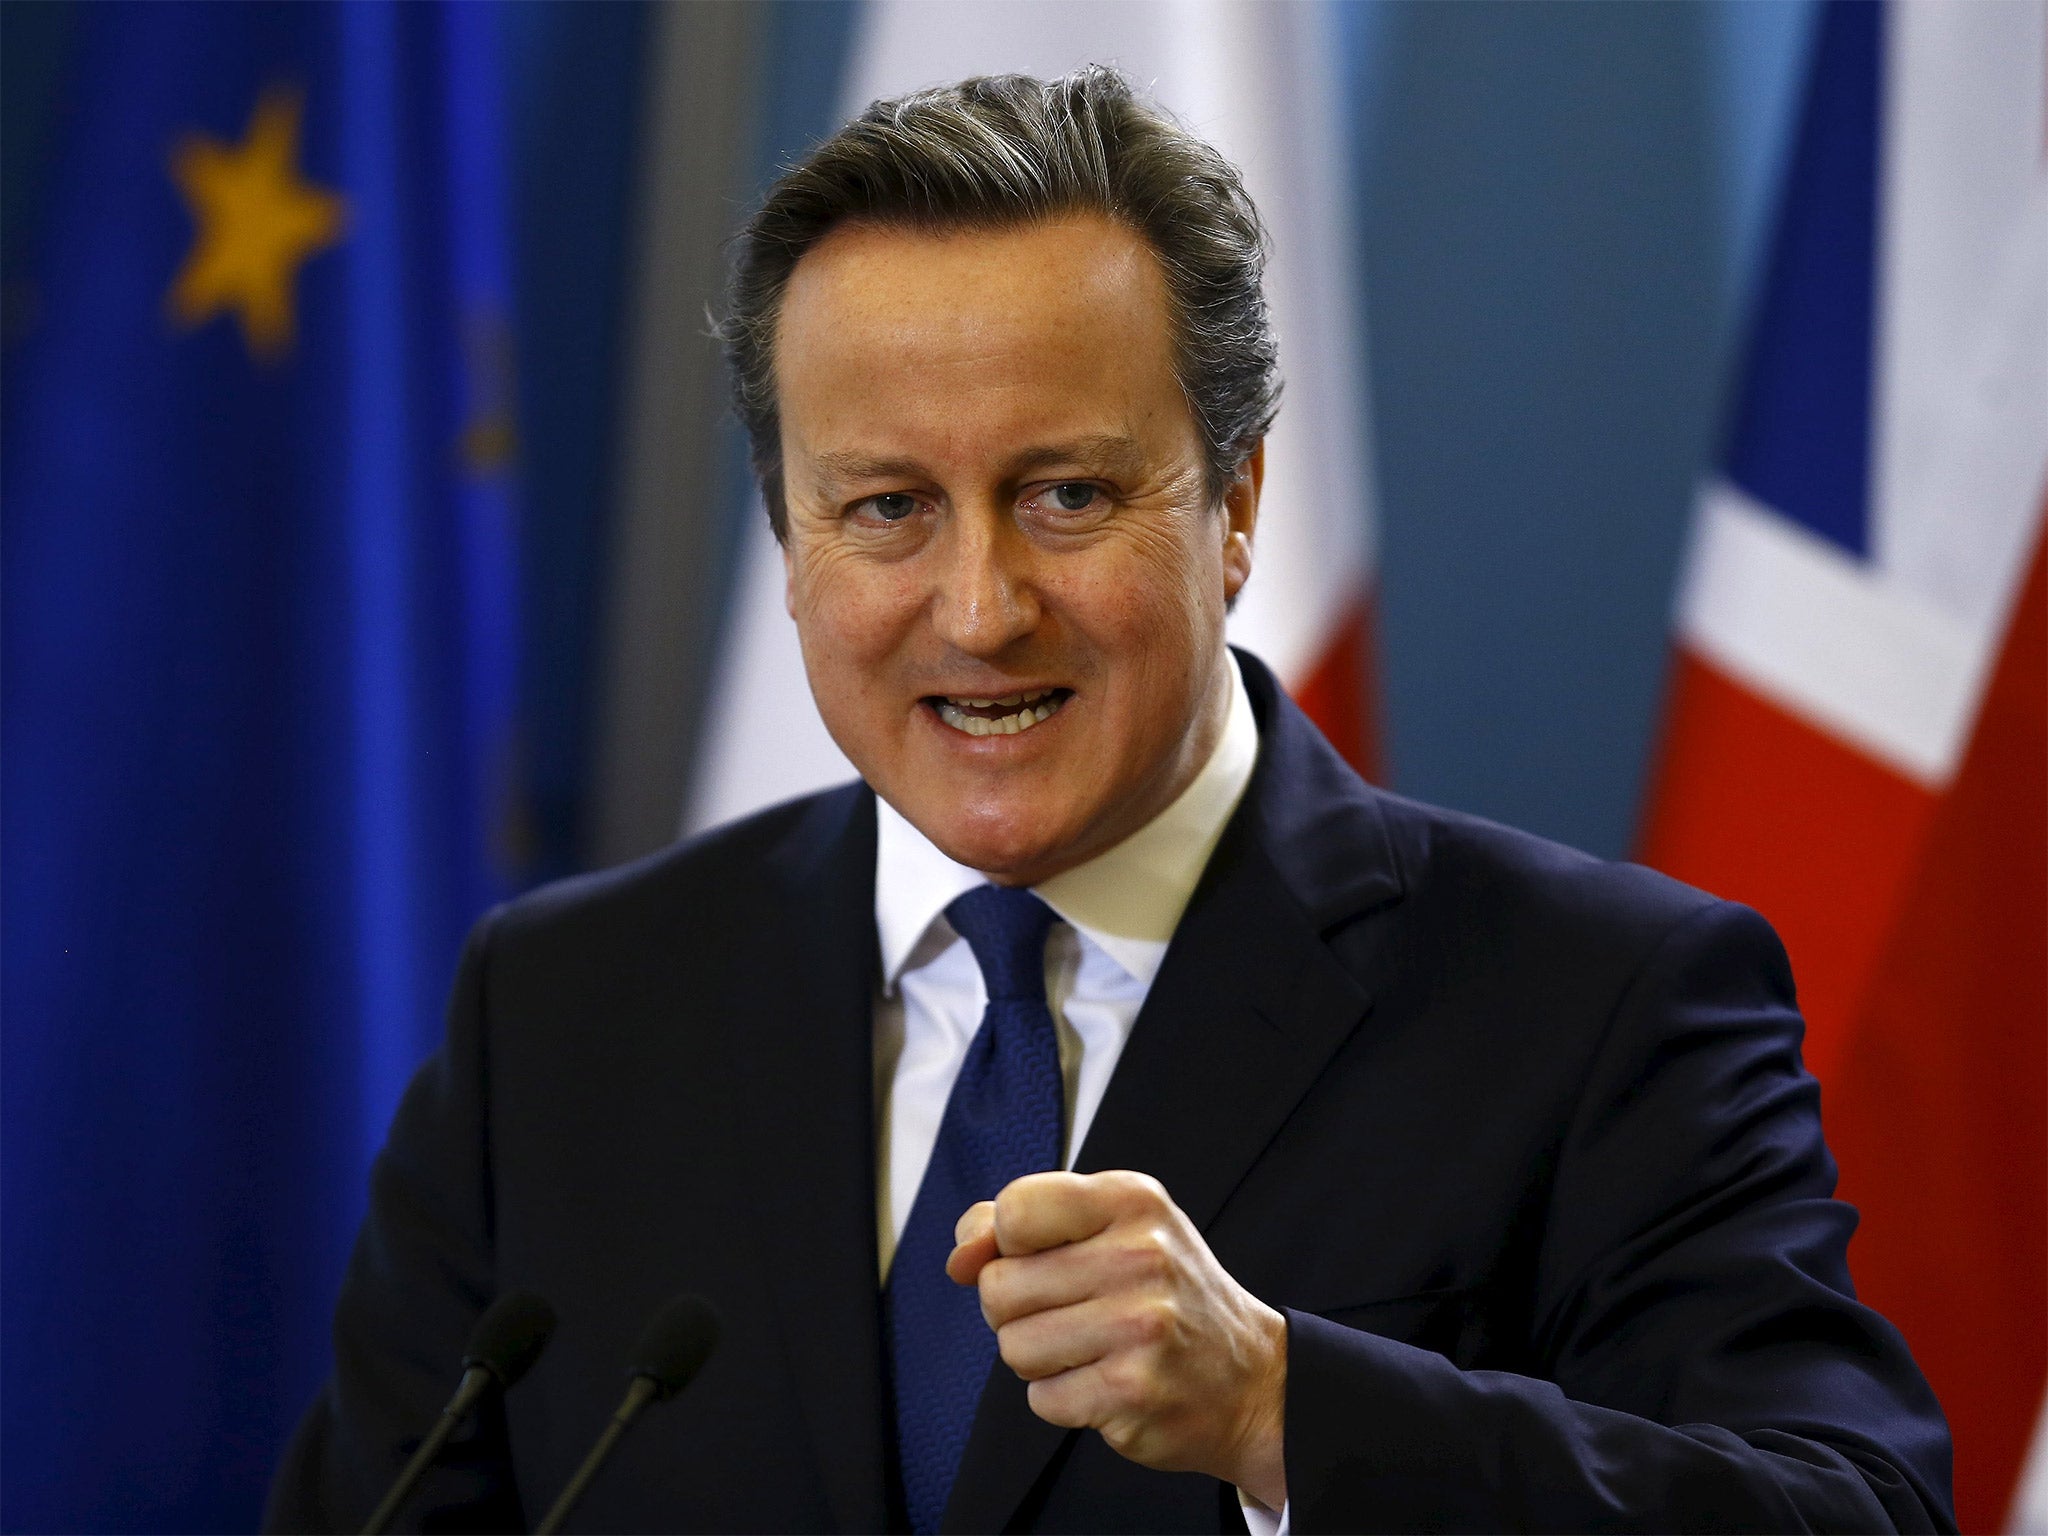 David Cameron was boosted by support for his demands from Angel Merkel